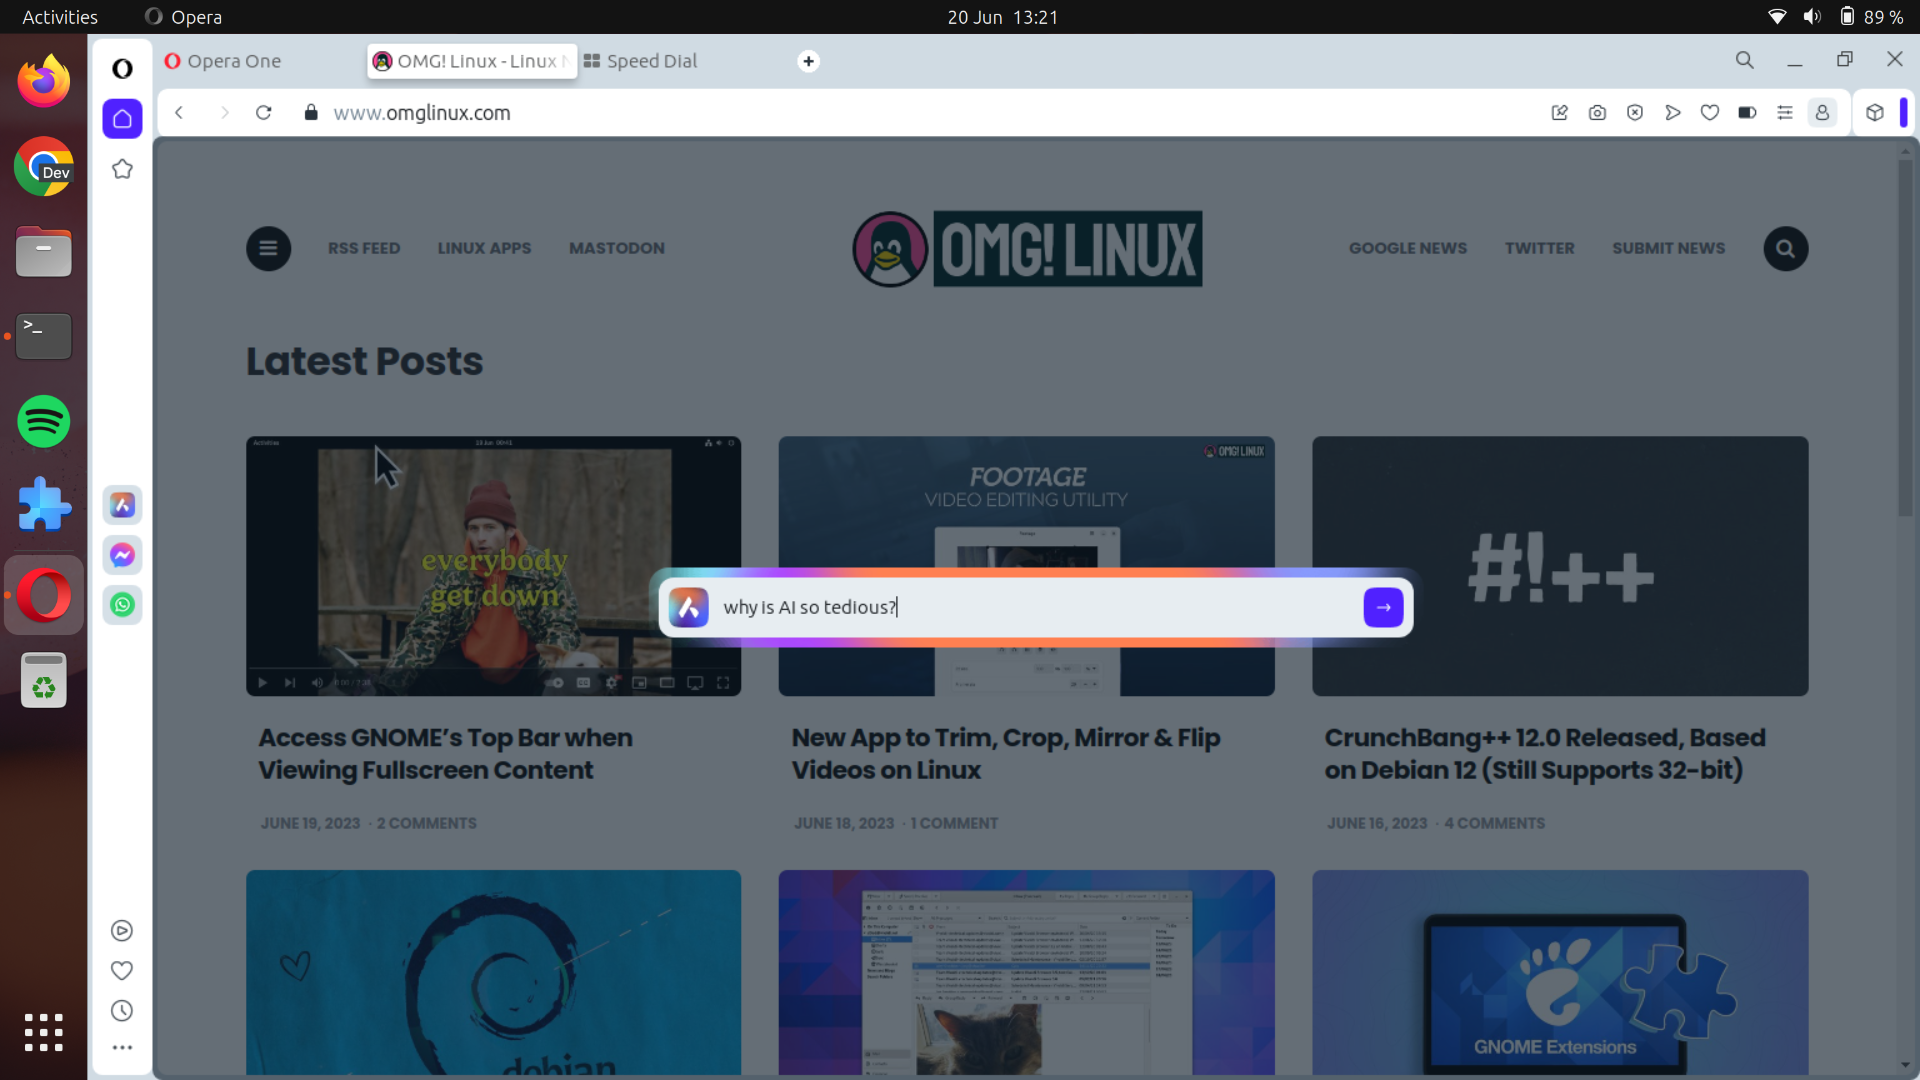 Gaming browser Opera GX integrates ChatGPT-powered AI feature